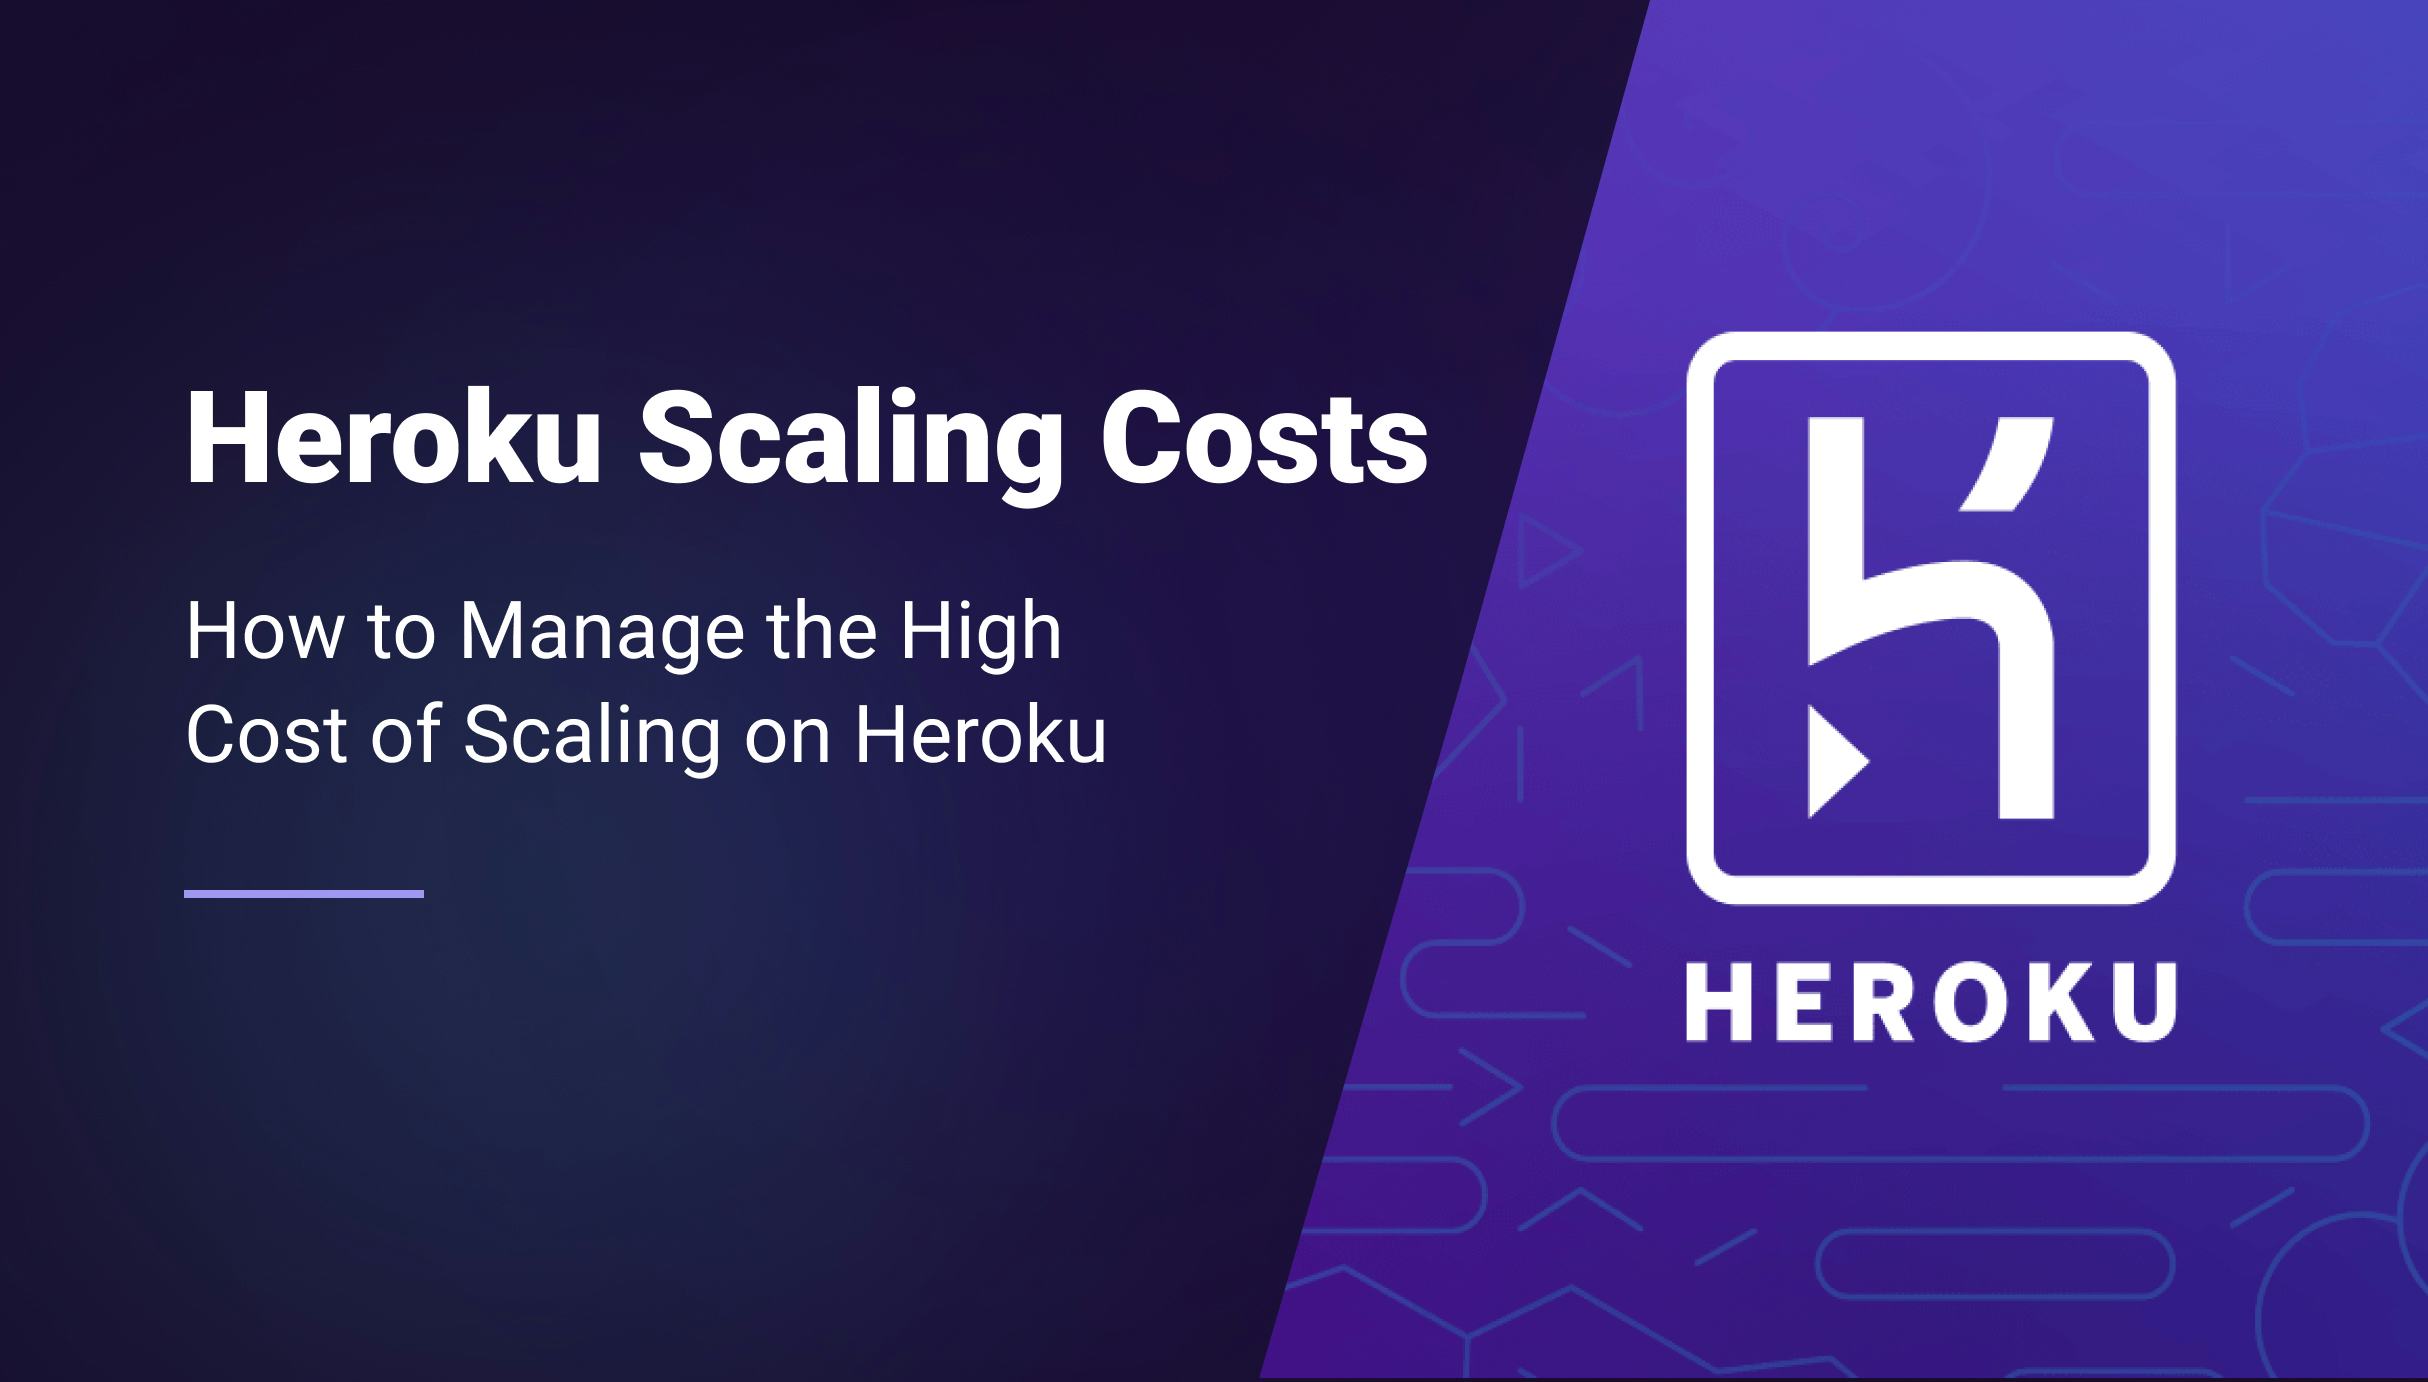 How to Manage the High Cost of Scaling on Heroku